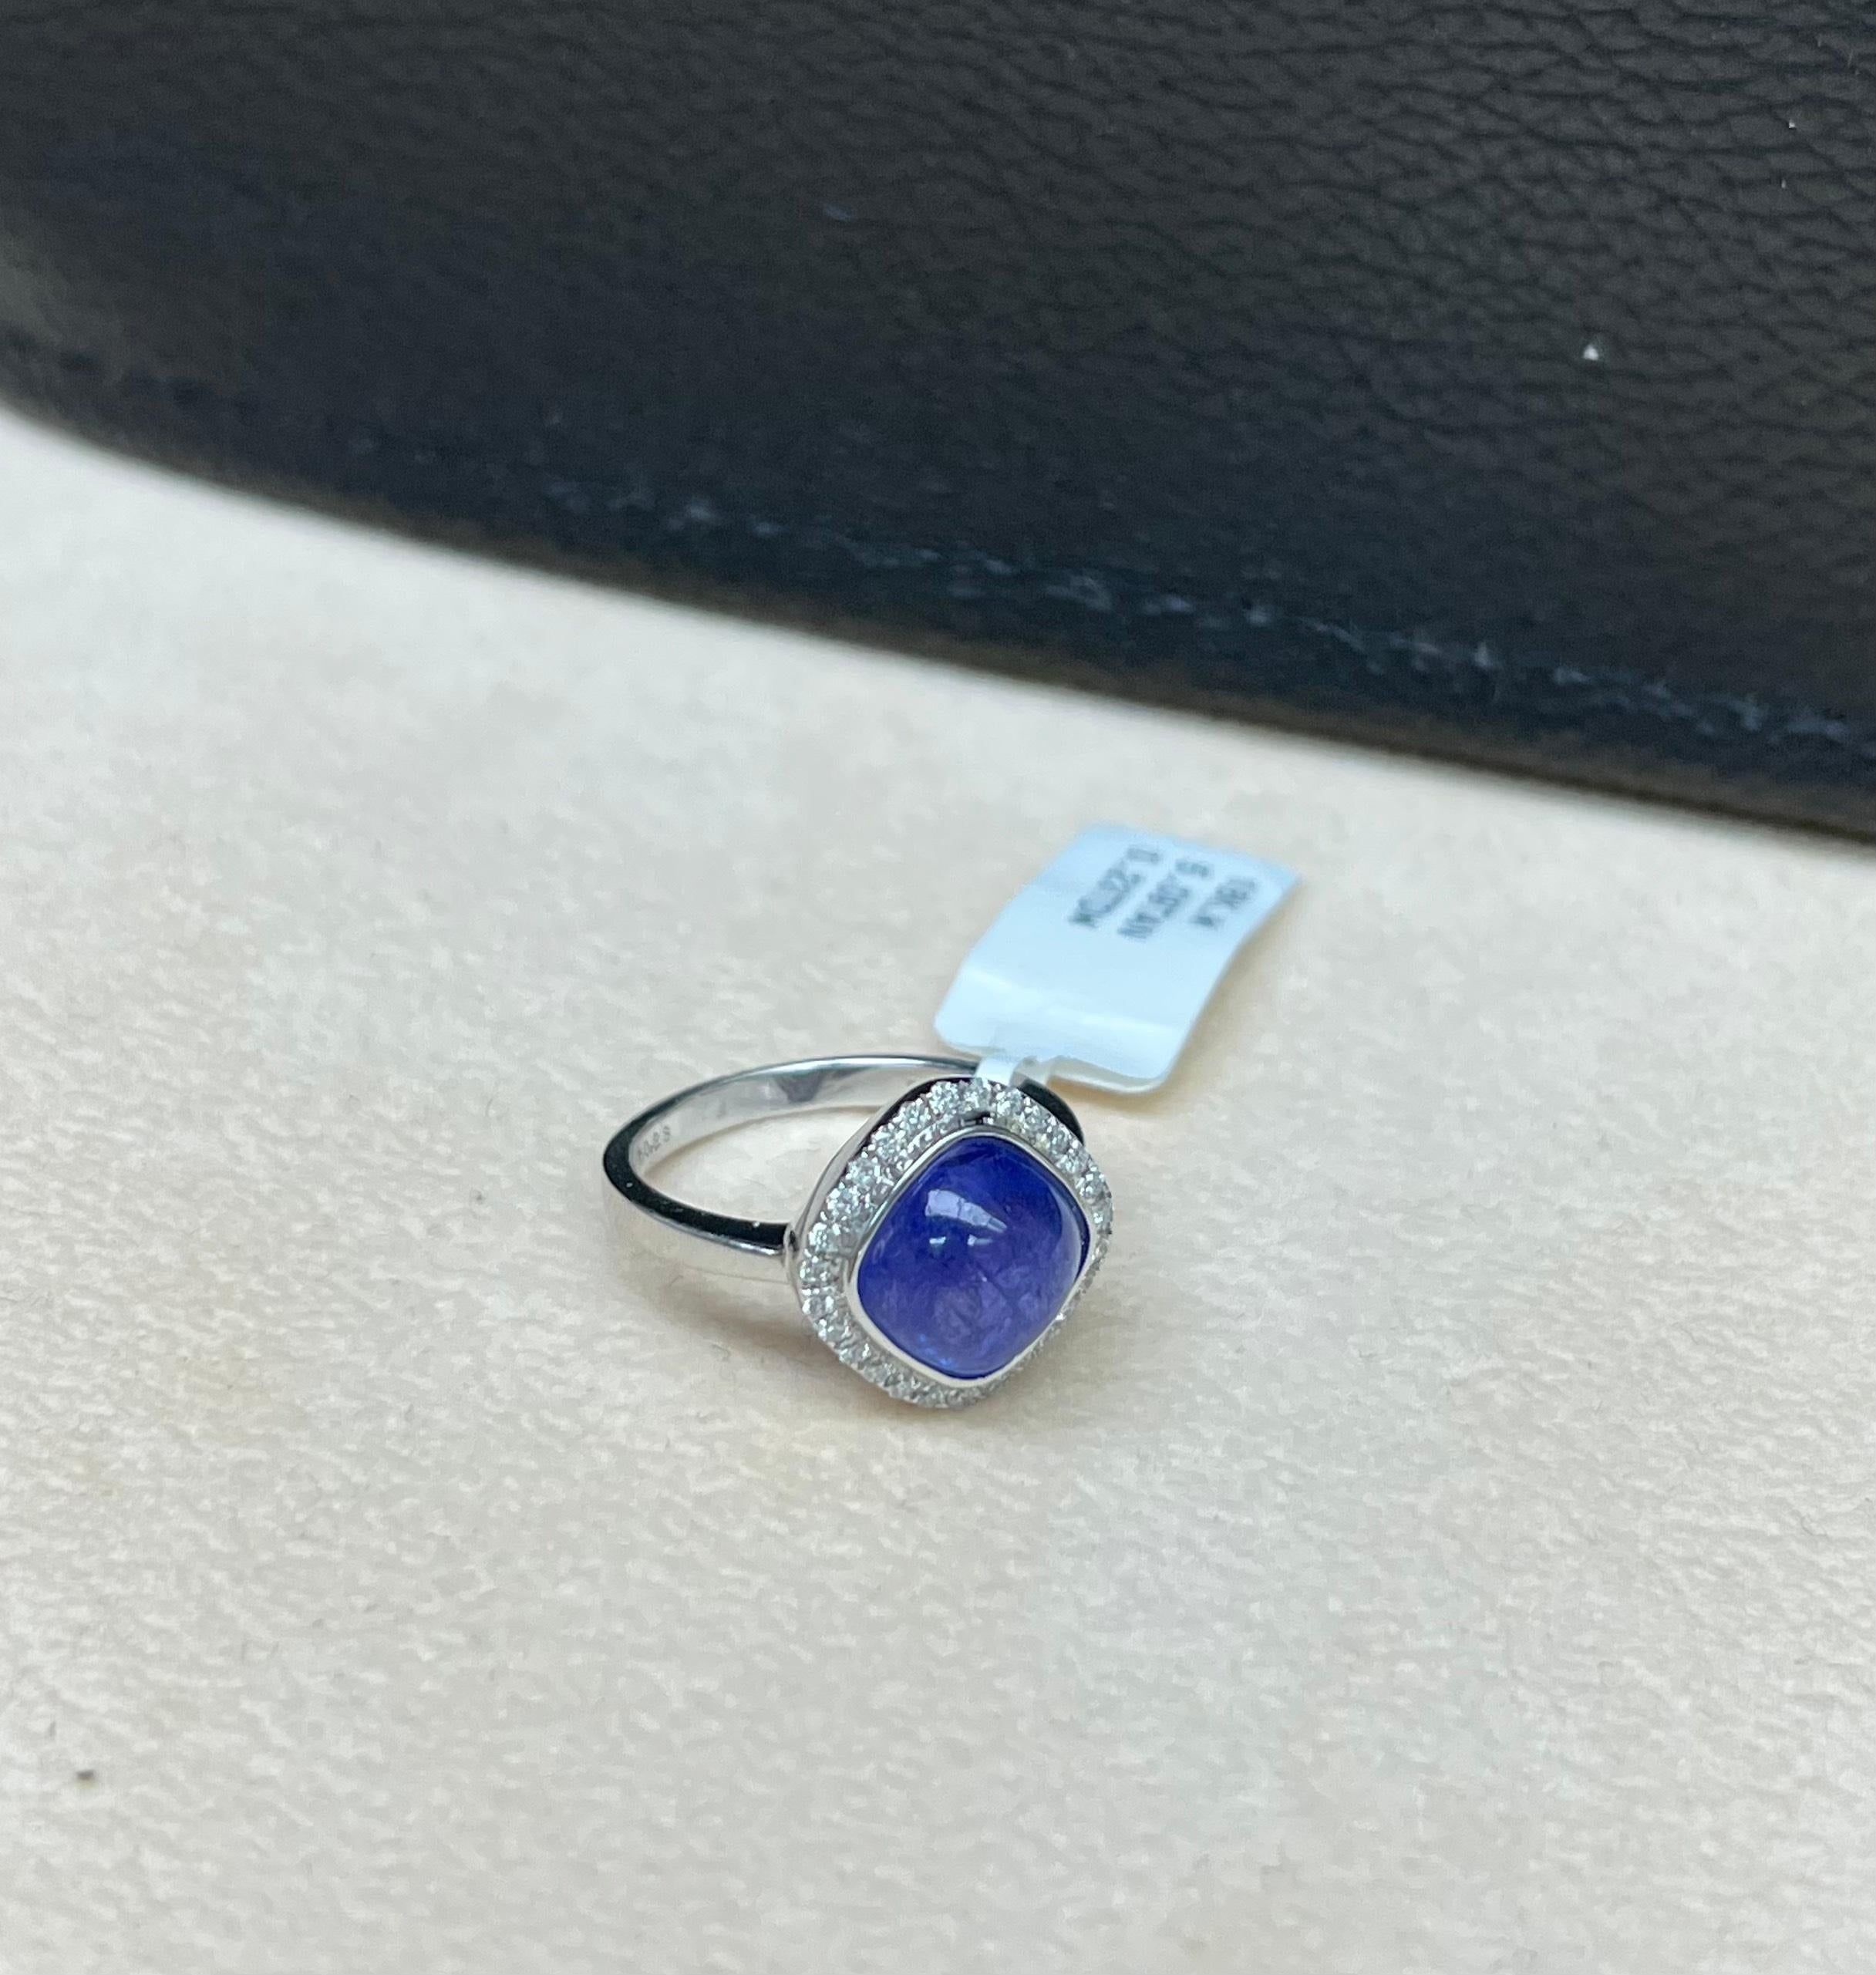 Gorgeous Natural Vivid Blue Tanzanite 5.09 Total Carat Weight

Natural Round White Diamonds .23 Total Diamond Weight 

18K Solid White Gold 

Comfortable fit and quality made

Size: 6.5 

Sizable 

Free Insured Shipping 